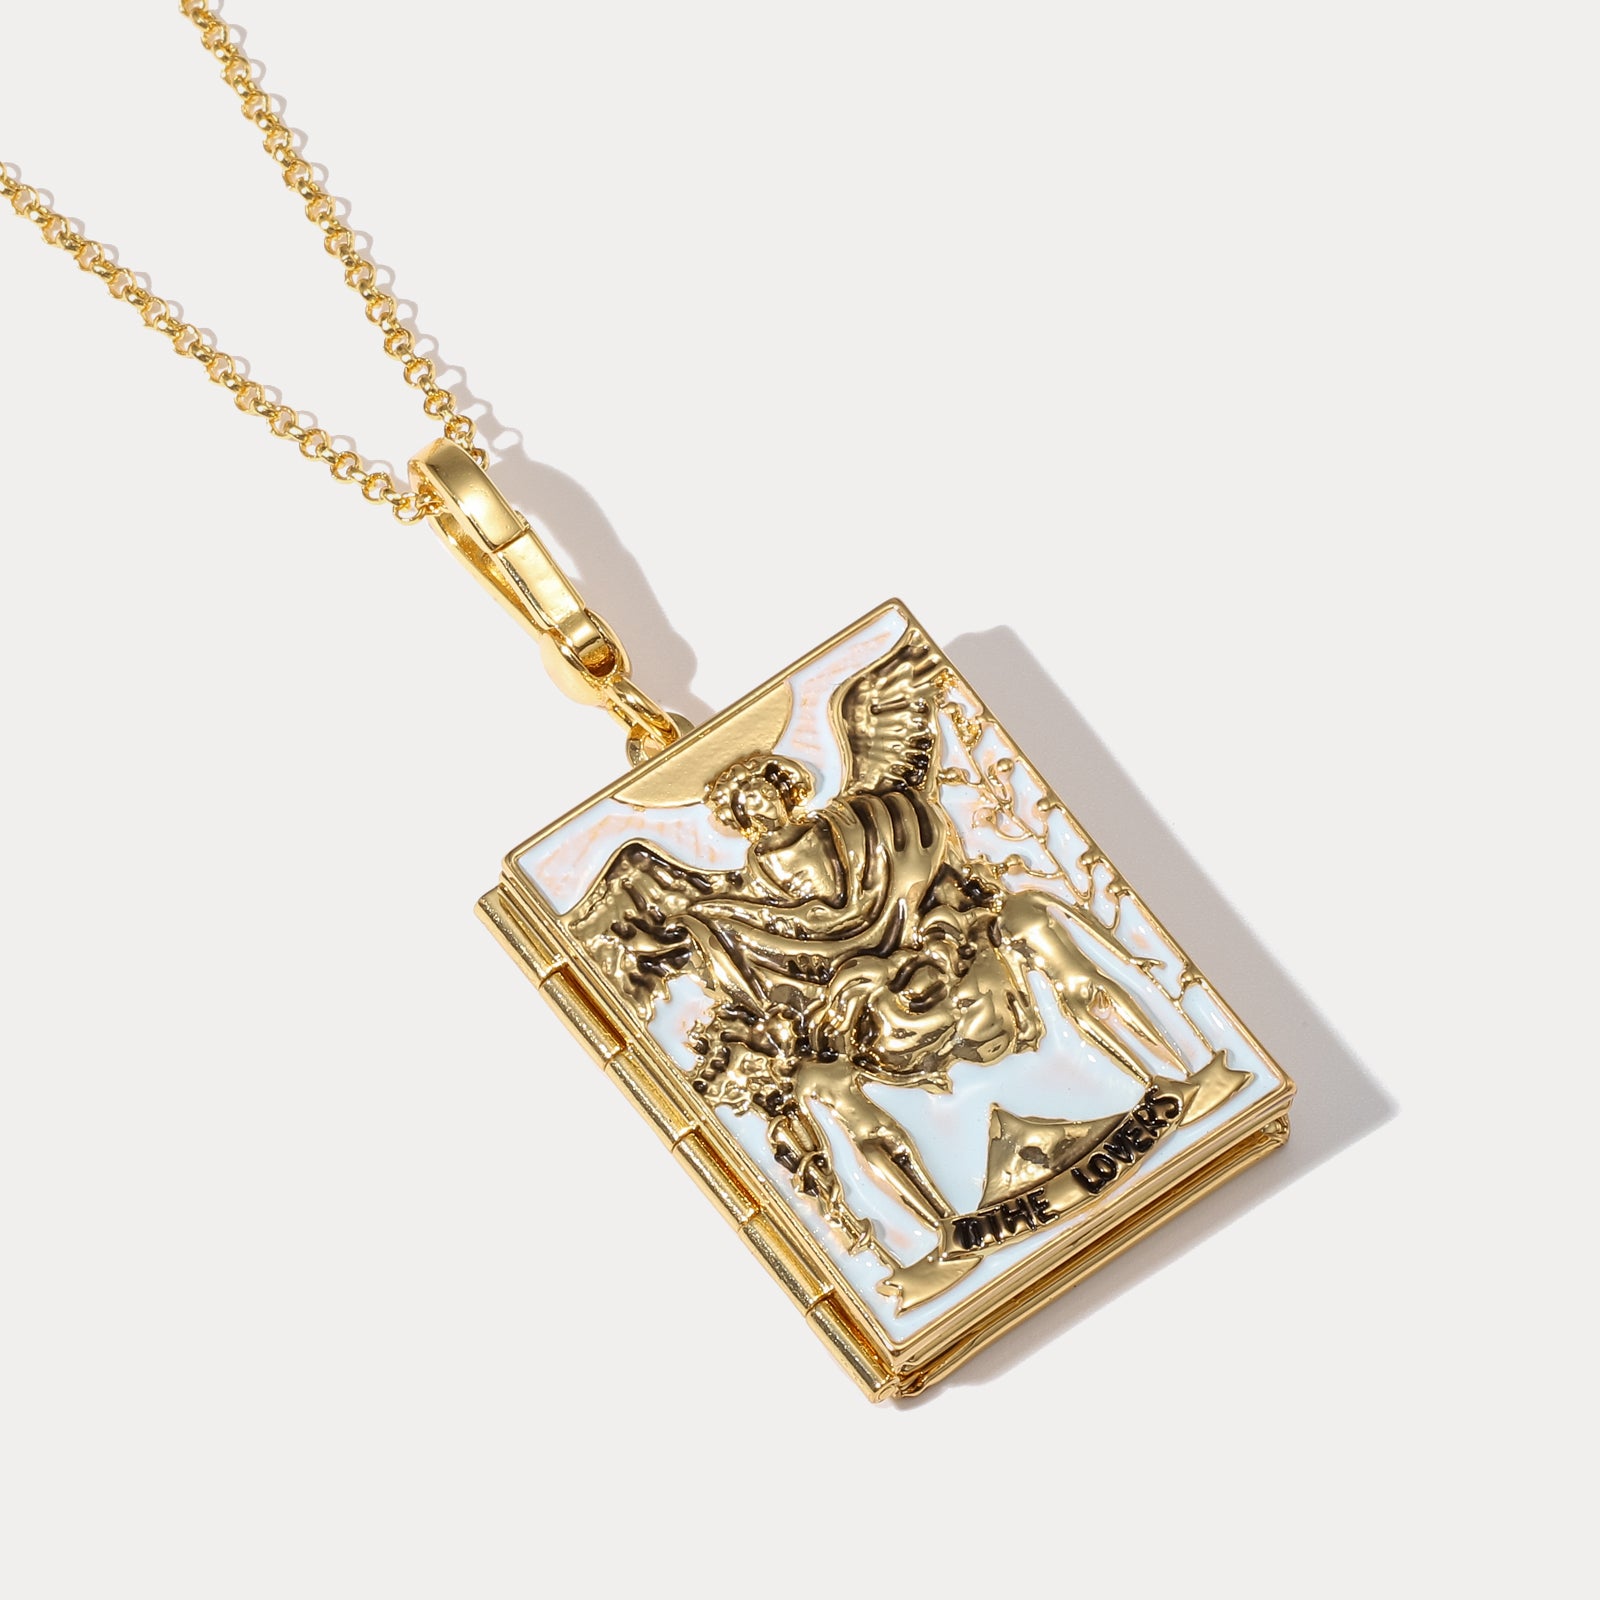 Tarot Locket Necklace-The Lovers Astrology Jewelry